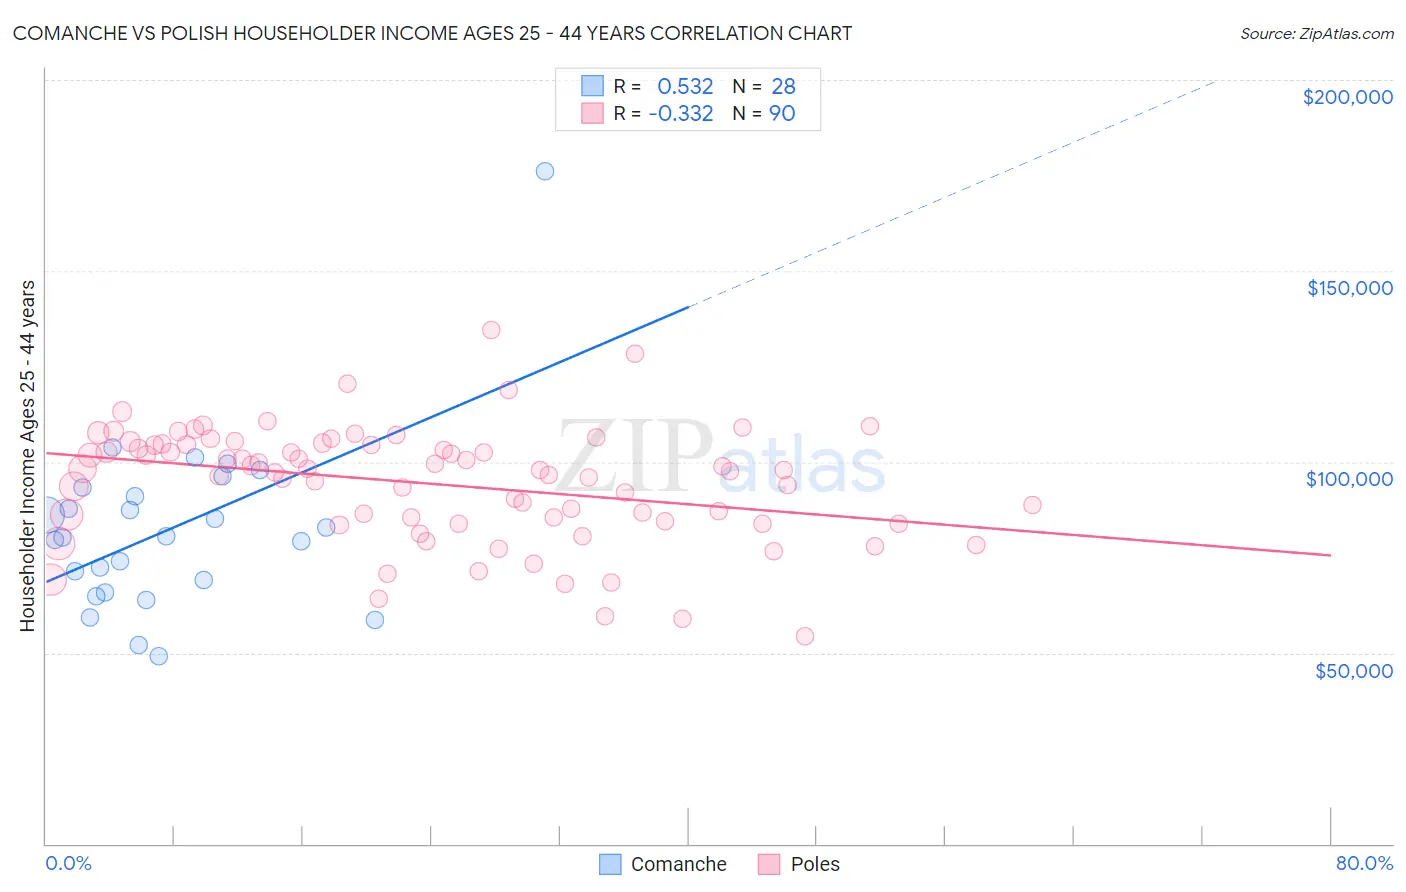 Comanche vs Polish Householder Income Ages 25 - 44 years